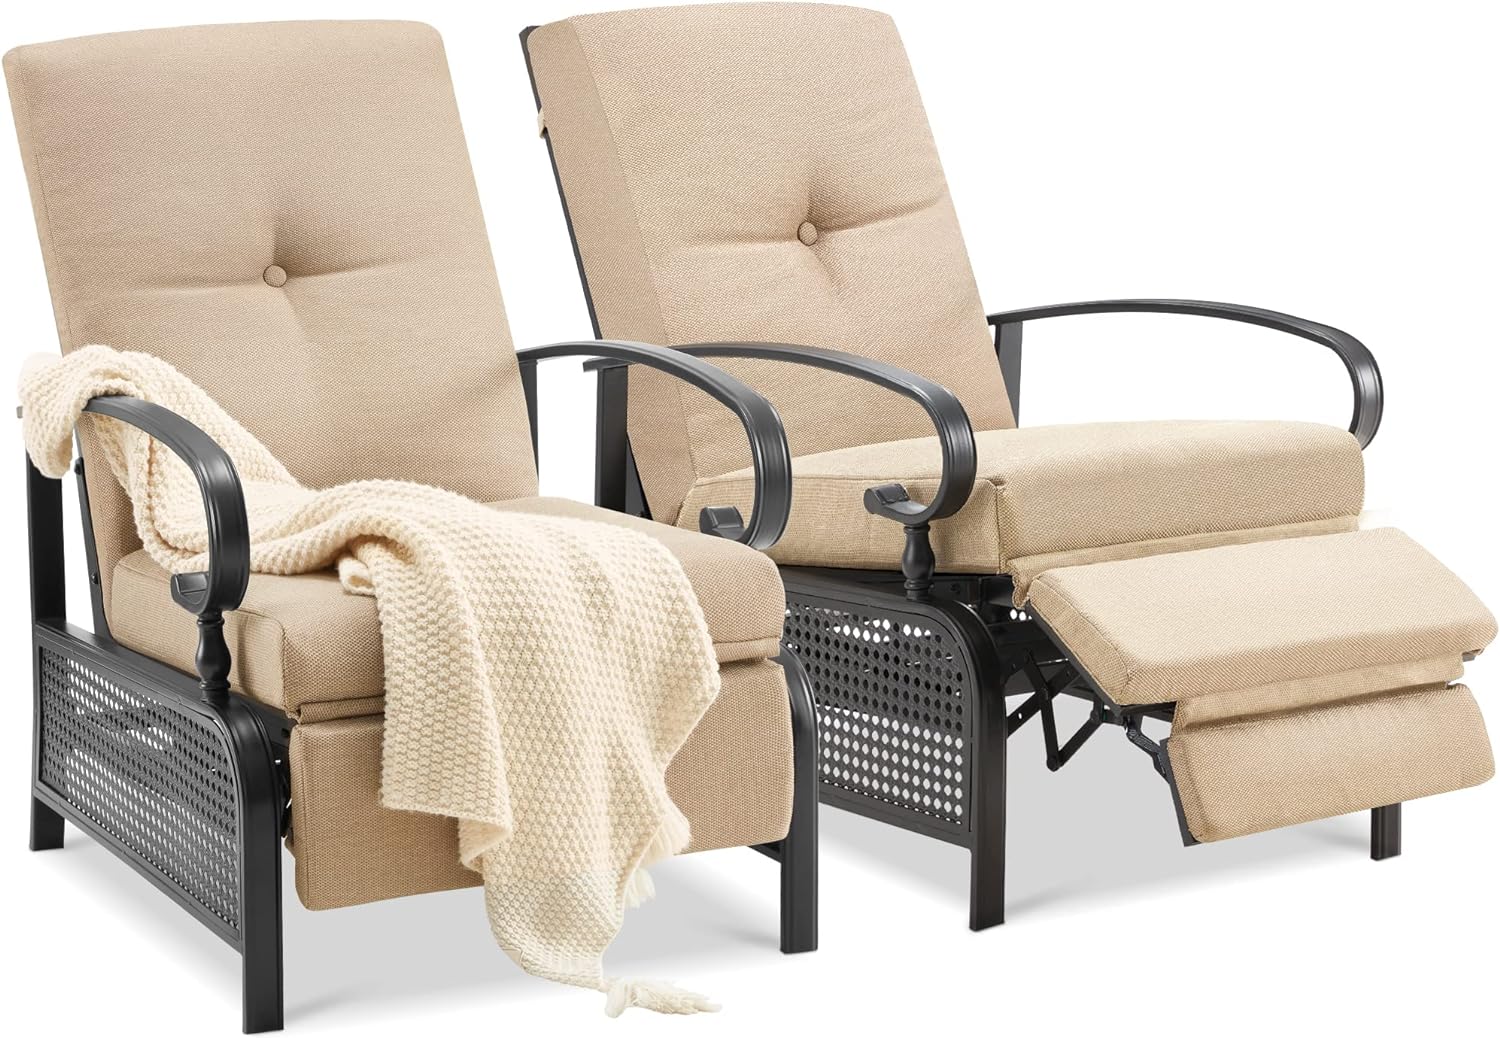 AECOJOY Outdoor Recliner Chairs Set of 2, Patio Outdoor Lounge Chairs Set of 2 with Adjustable Back, Pool Lounge Chairs with Beige Olefin Cushions (Removable)